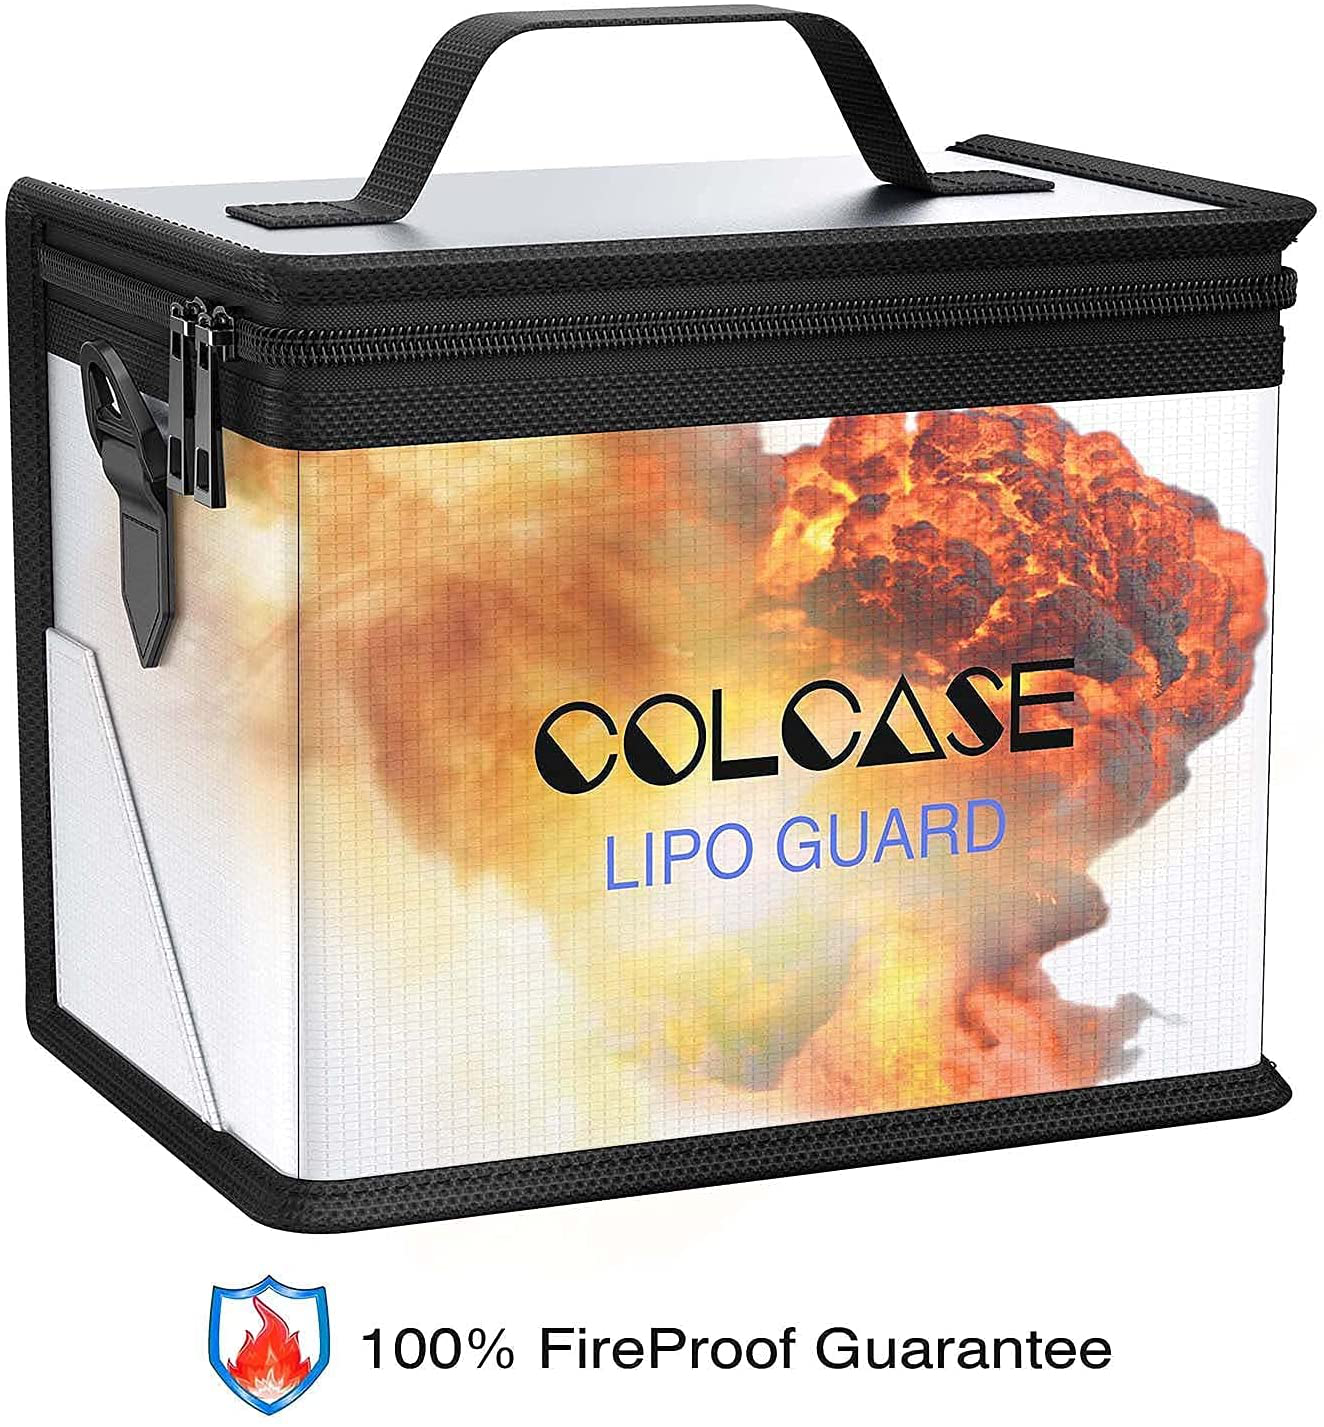 COLCASE Upgraded Fireproof Lipo Safe Bag for Lipo Battery Storage and Charging , Large Space Highly Sturdy Double Zipper Lipo Battery Guard (8.46x5.70x6.5 in)